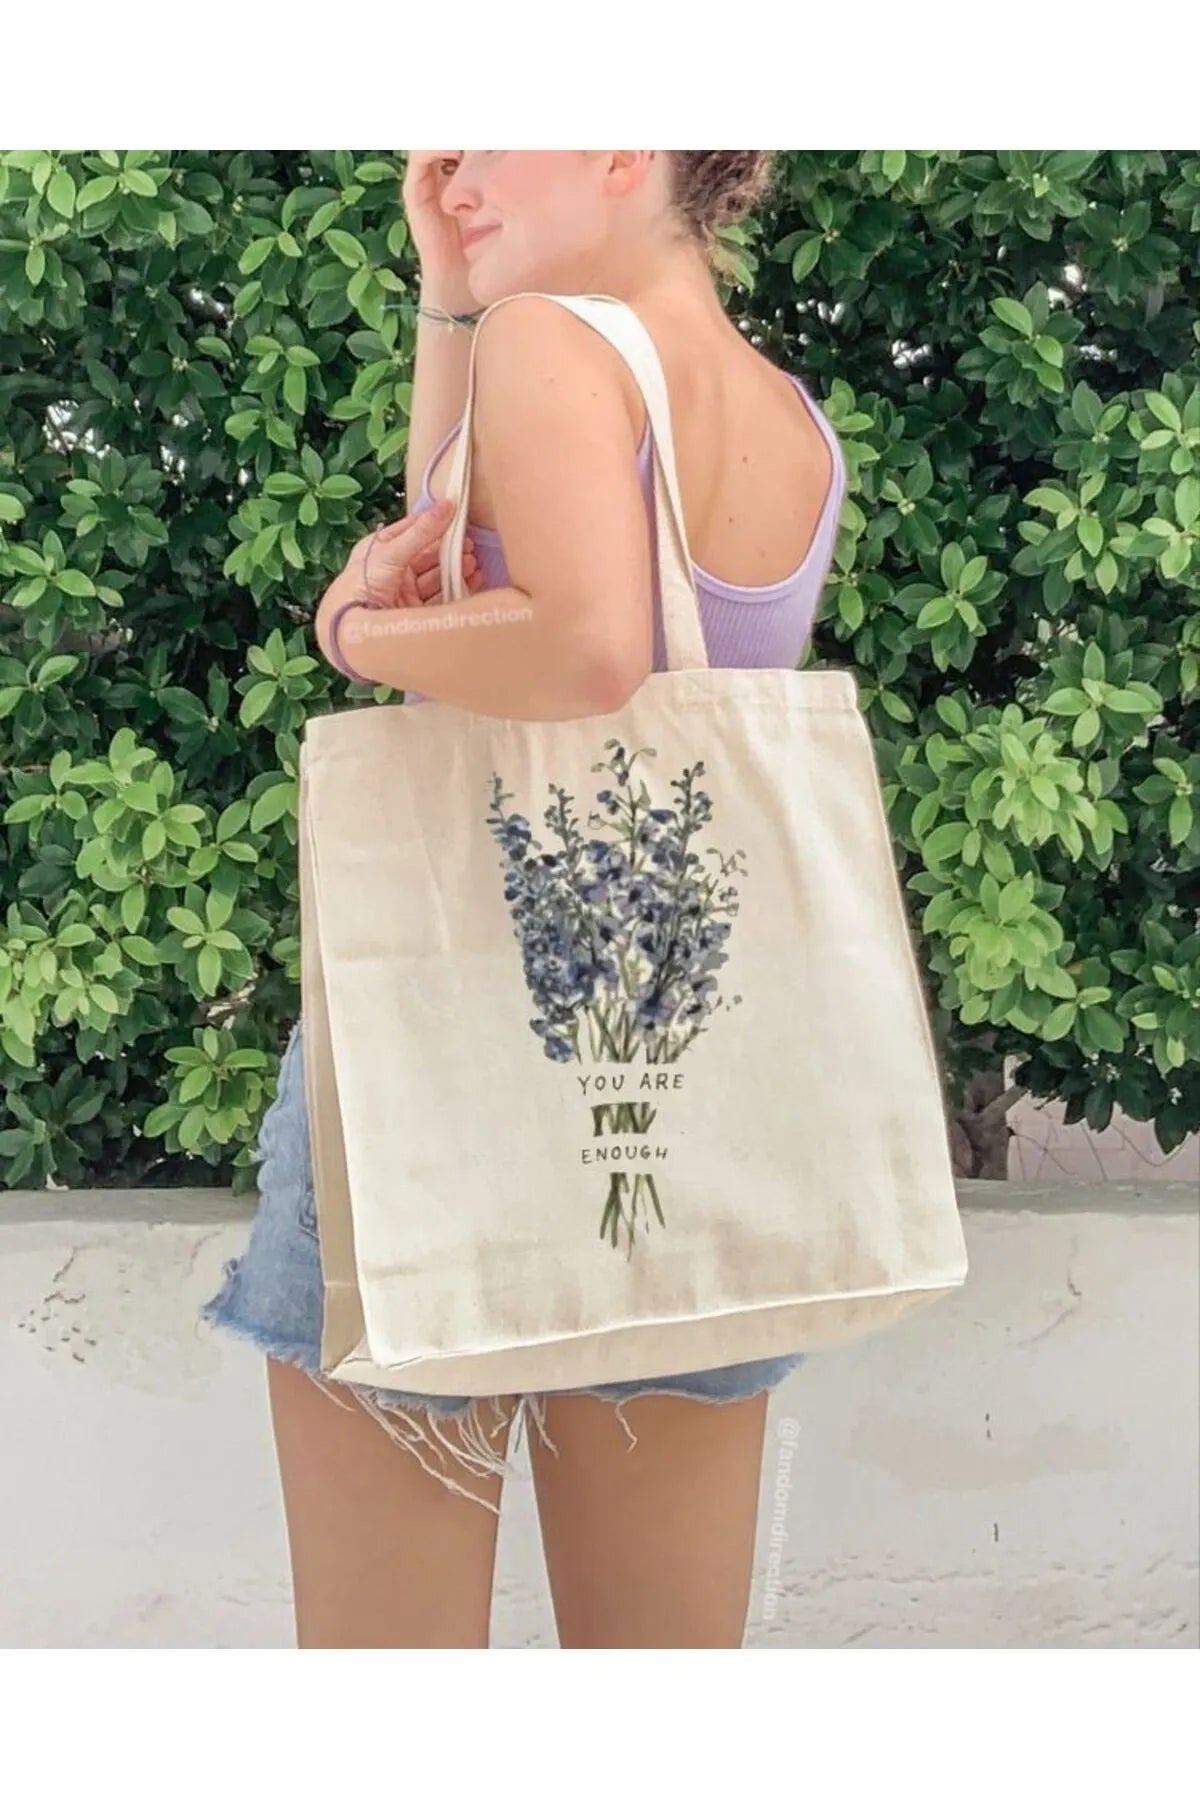 "You Are Enough" Lavender Printed 100% Cotton Raw Cloth Bag - Medium Size, Eco-Friendly, Sustainable, Casual Daily Use